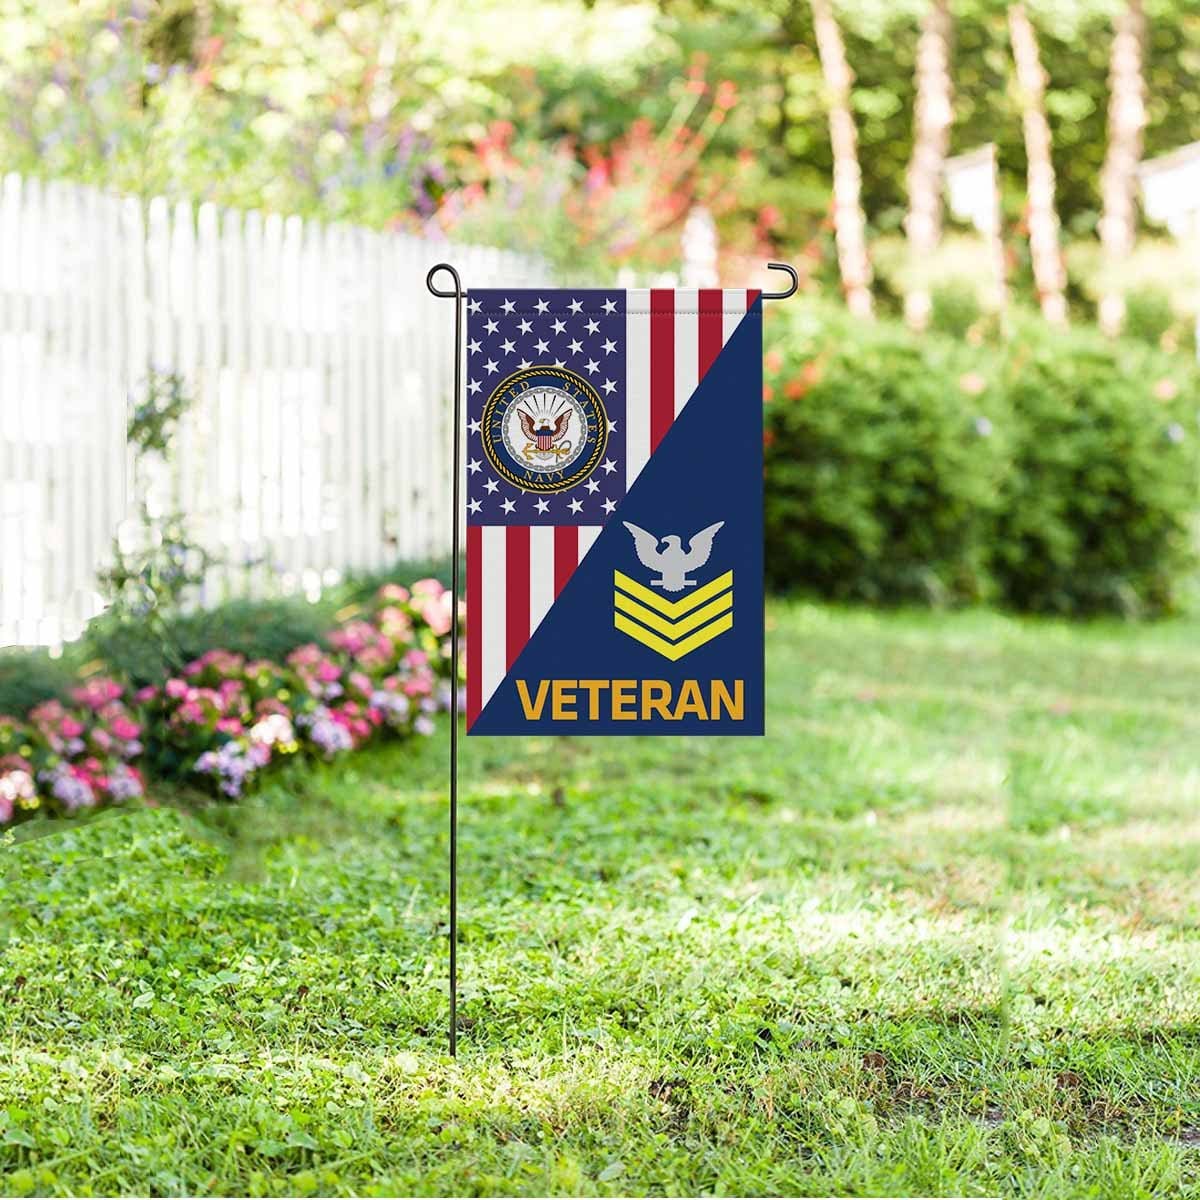 US Navy E-6 Petty Officer First Class E6 PO1 Gold Stripe Collar Device Veteran Garden Flag/Yard Flag 12 inches x 18 inches Twin-Side Printing-GDFlag-Navy-Collar-Veterans Nation